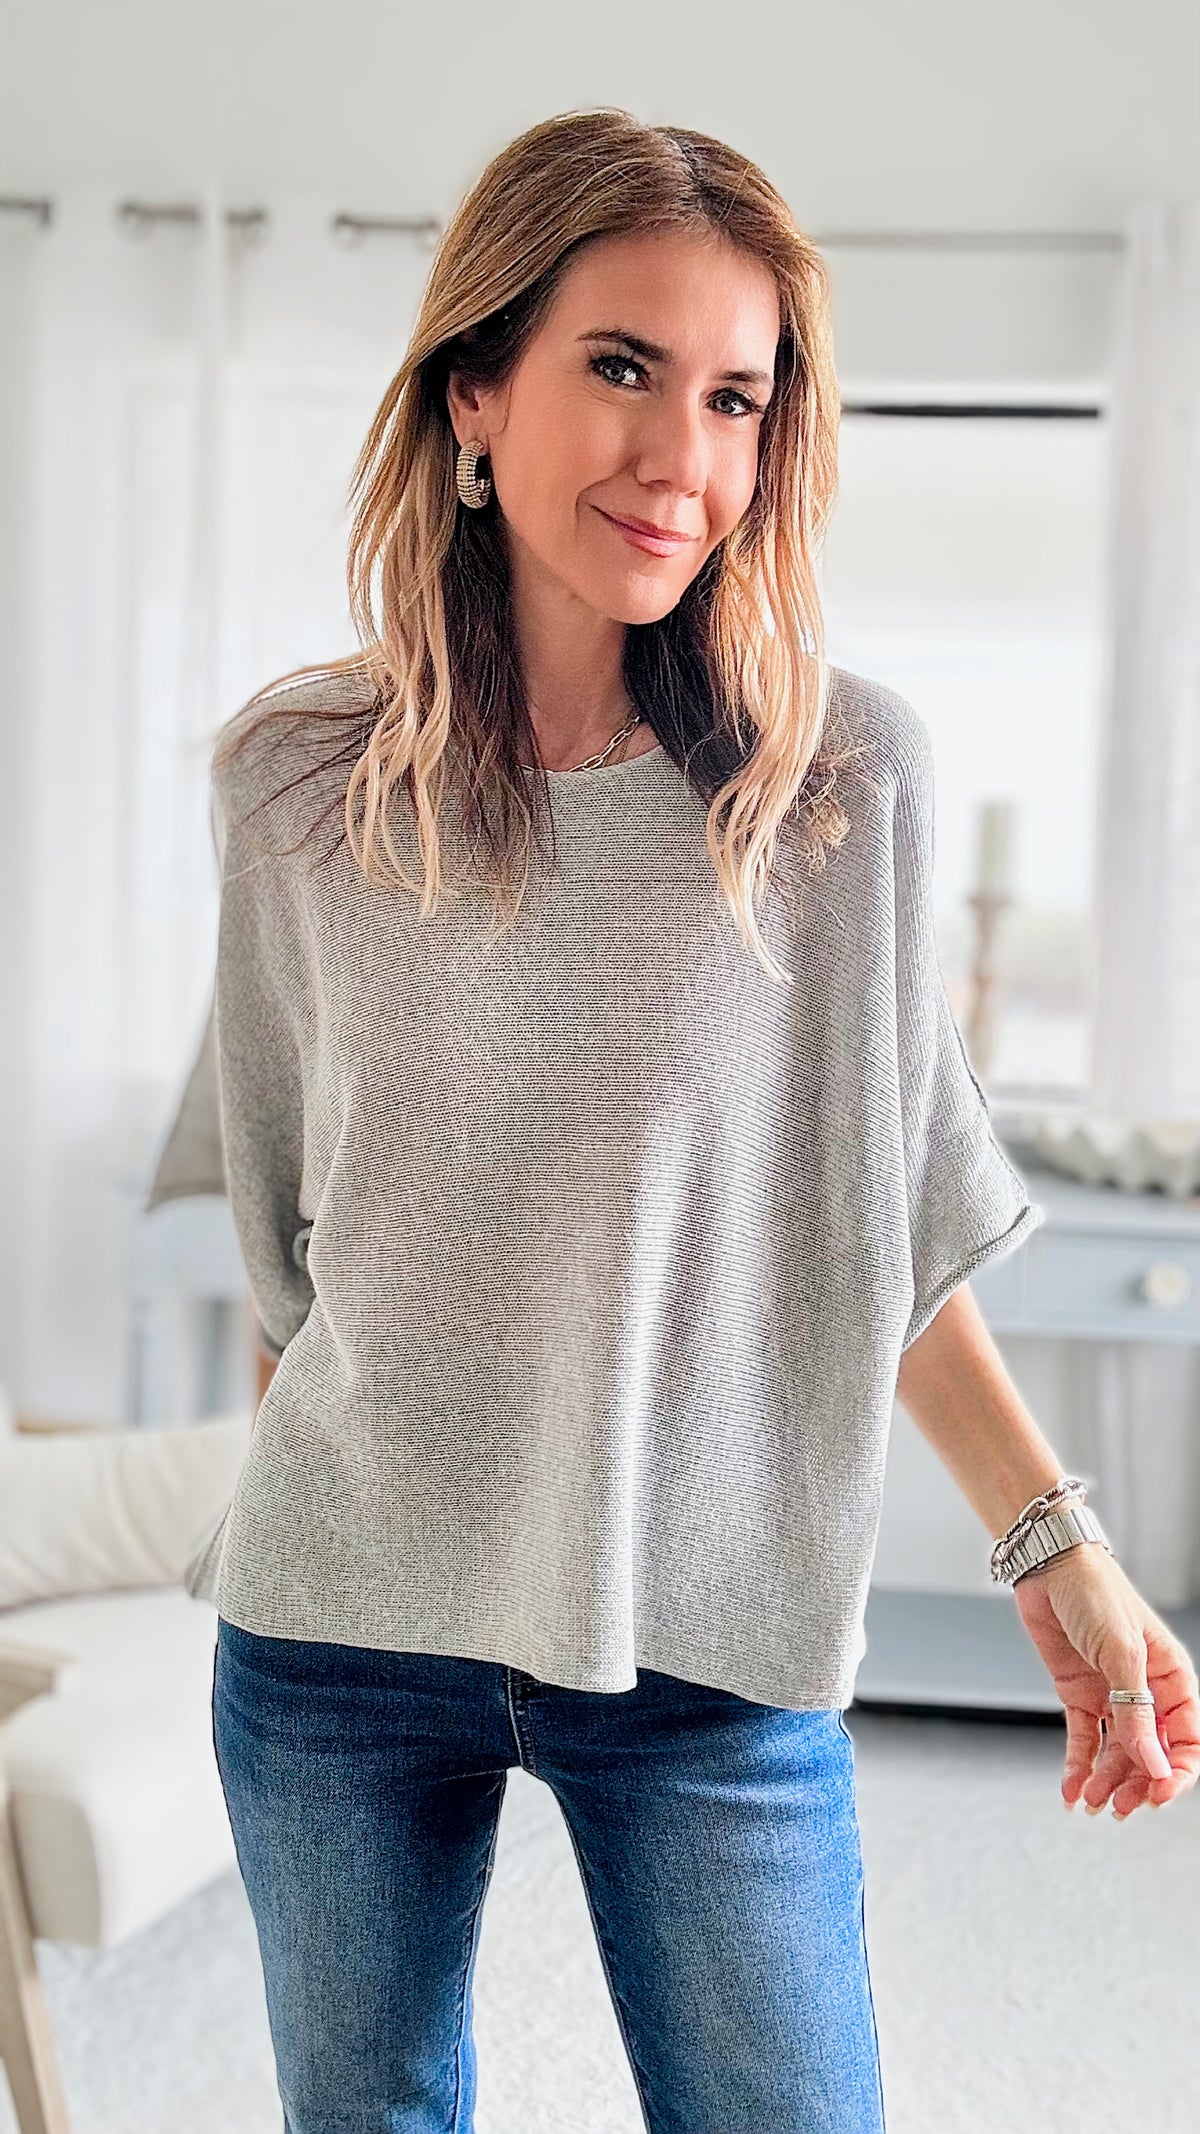 Amalfi Coast Italian Knit Pullover - Heather Grey-140 Sweaters-Italianissimo-Coastal Bloom Boutique, find the trendiest versions of the popular styles and looks Located in Indialantic, FL